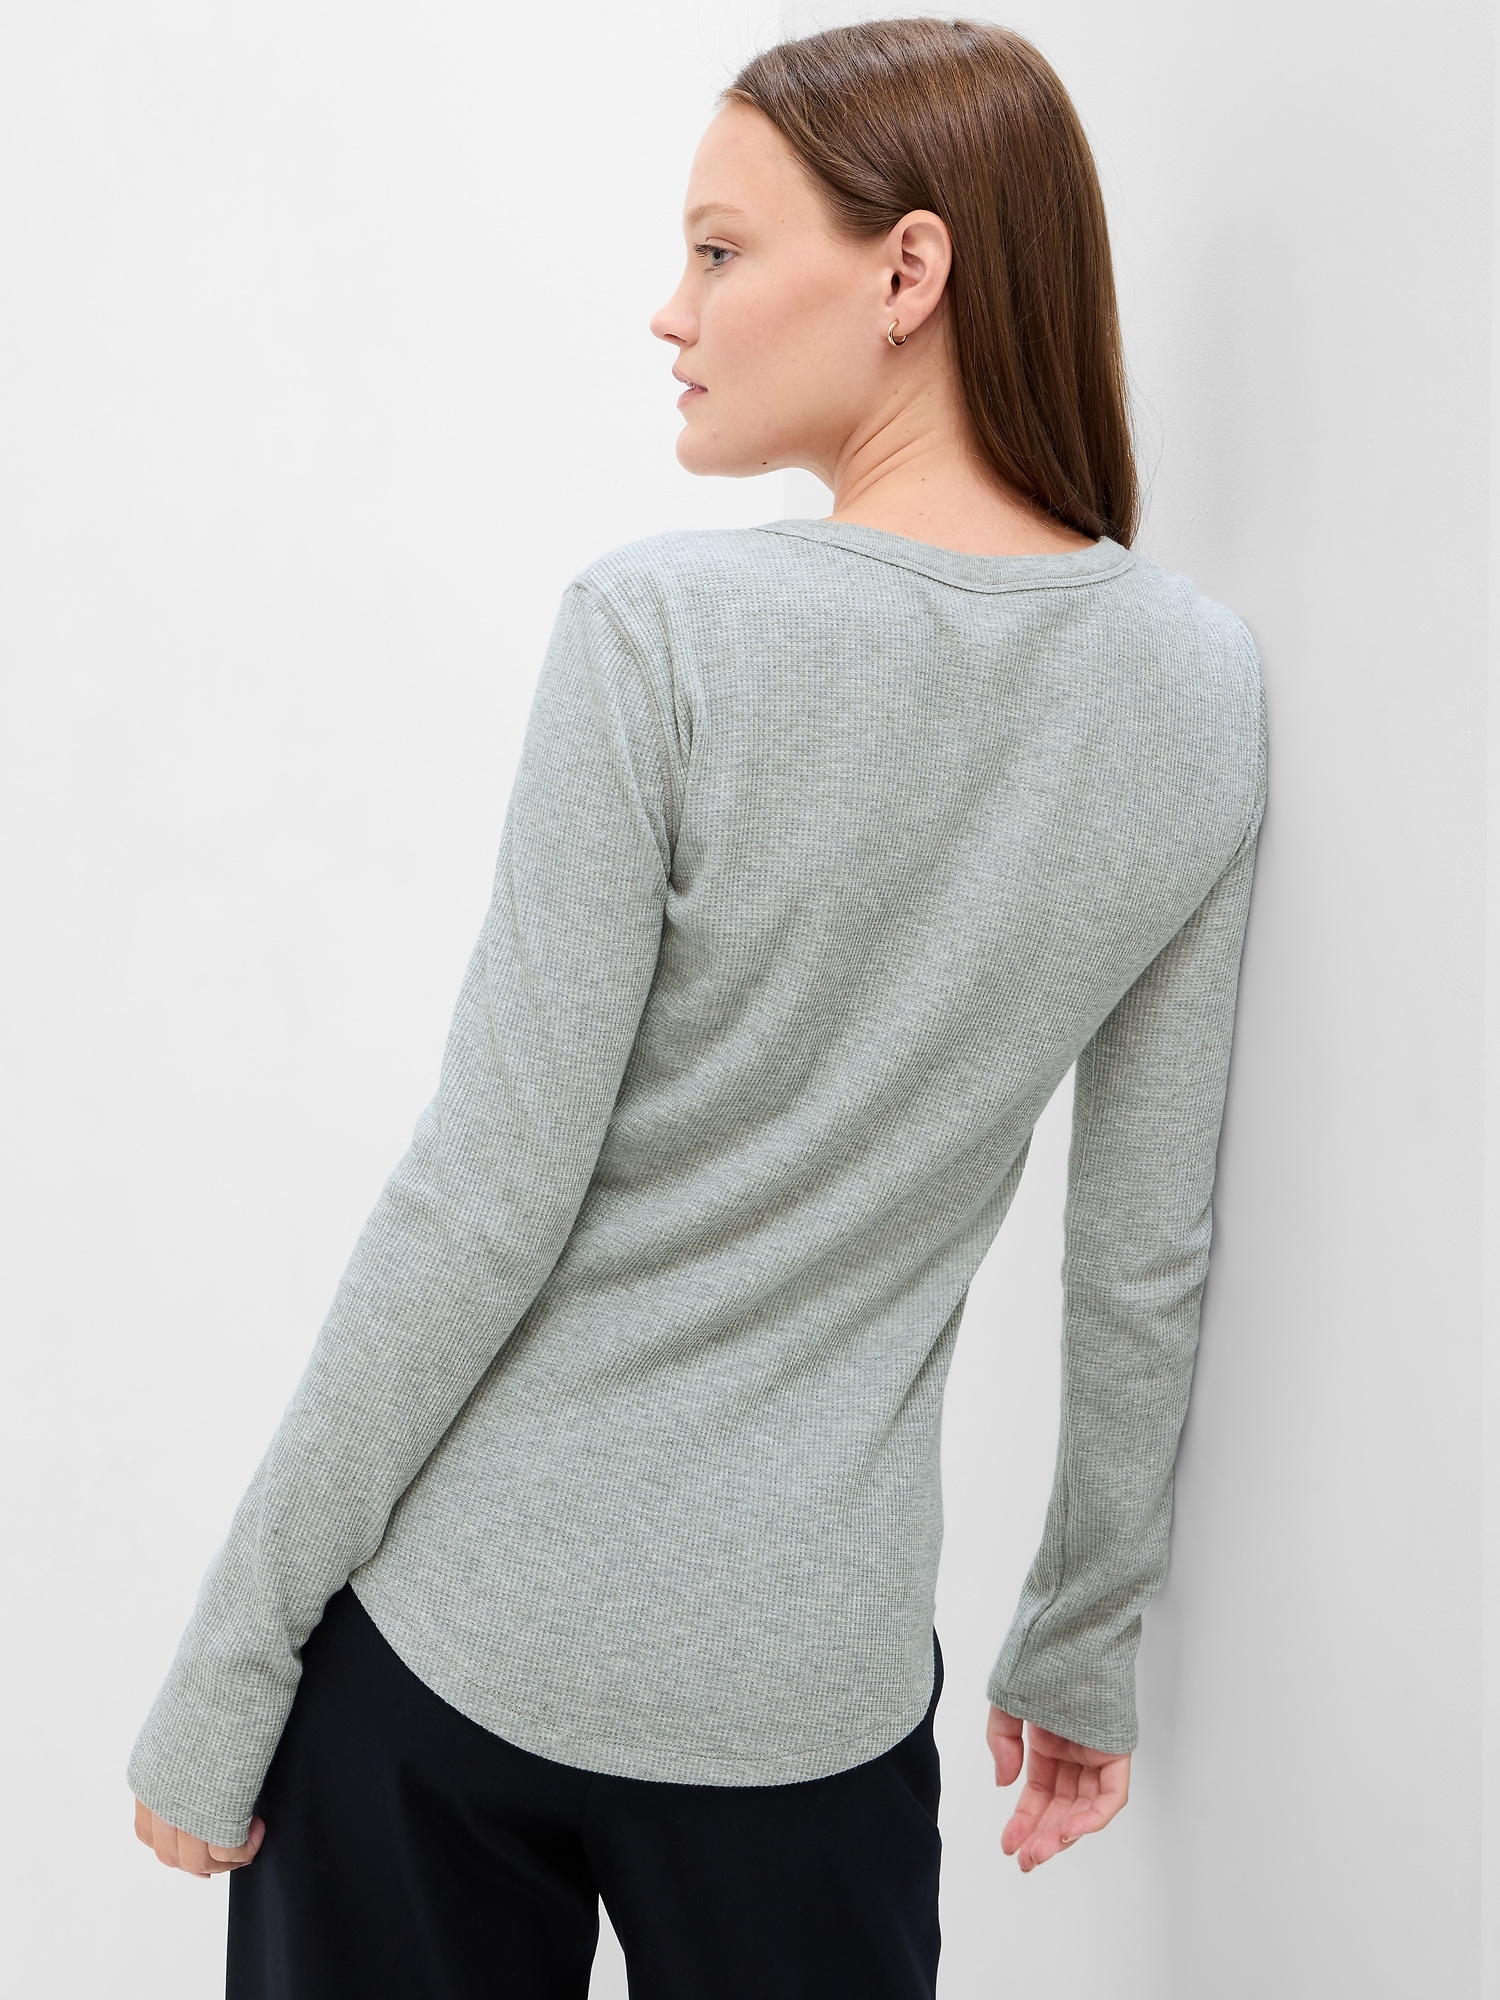 Girl With Curves Knit Long Sleeve Layering Tee Shirt Heather Gray